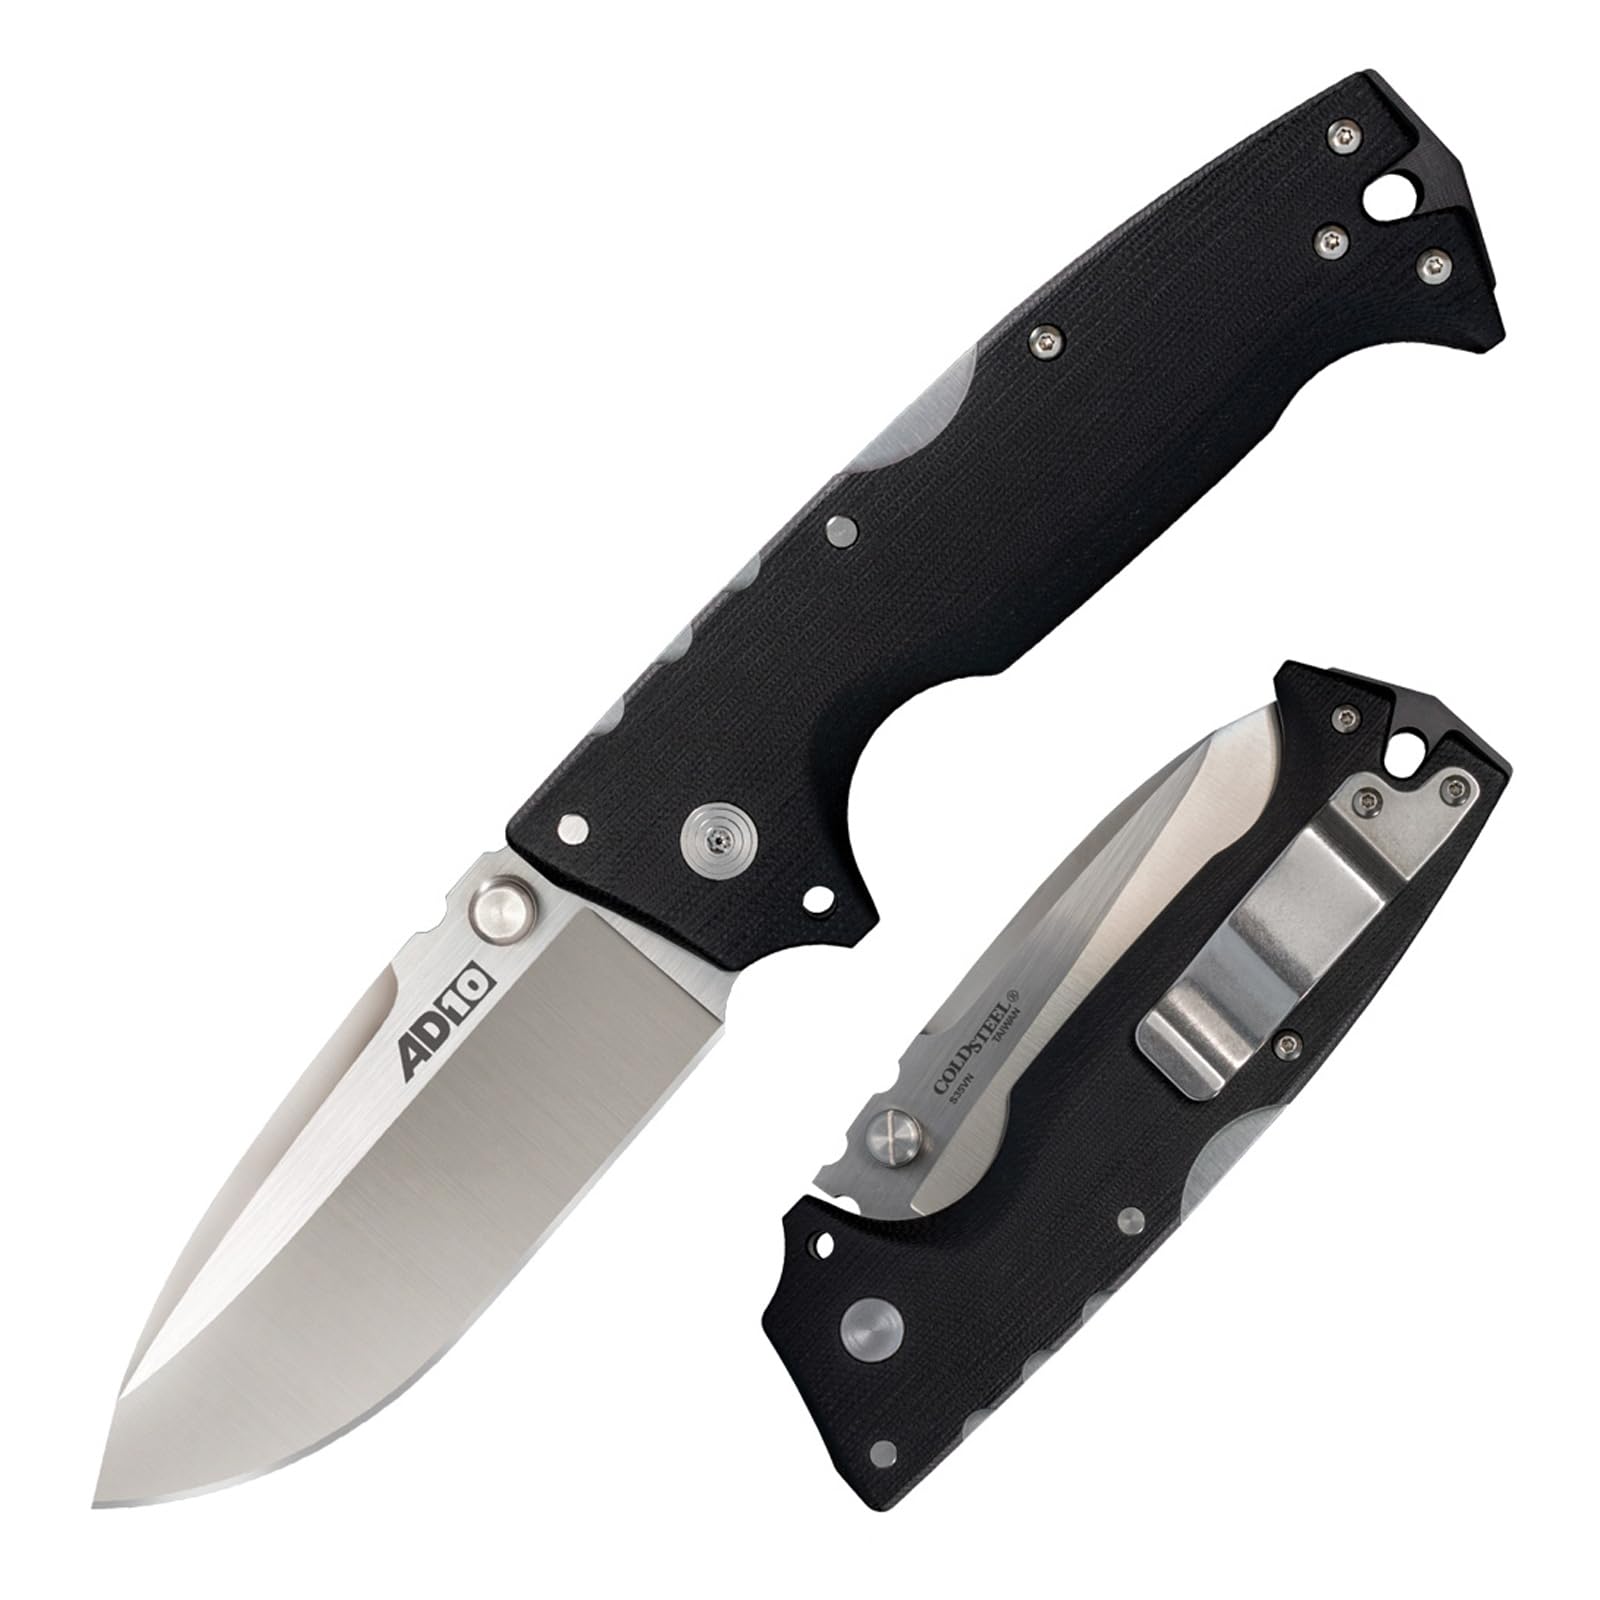 Cold Steel AD-10 in S35VN Steel ($99.99)